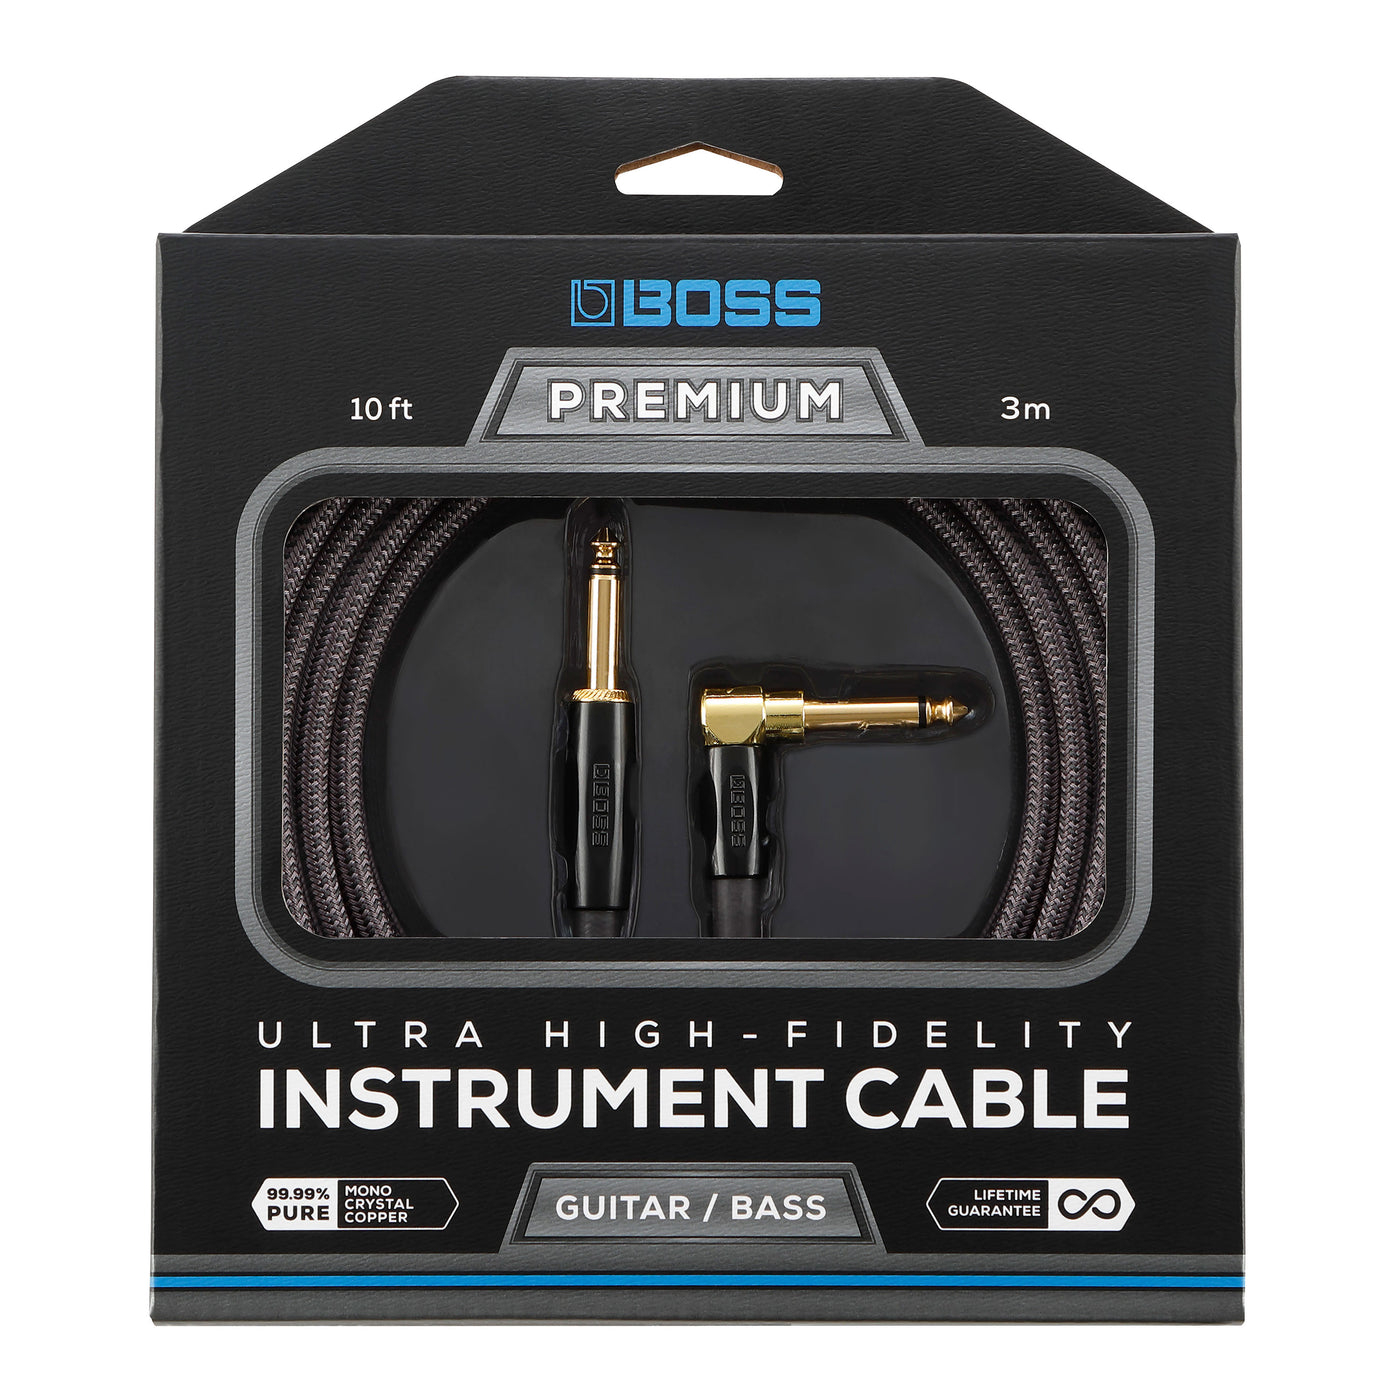 Boss BIC-P10A Premium Standard Instrument Cable, 10ft/3m with 1 Straight, 1 Angled Jack